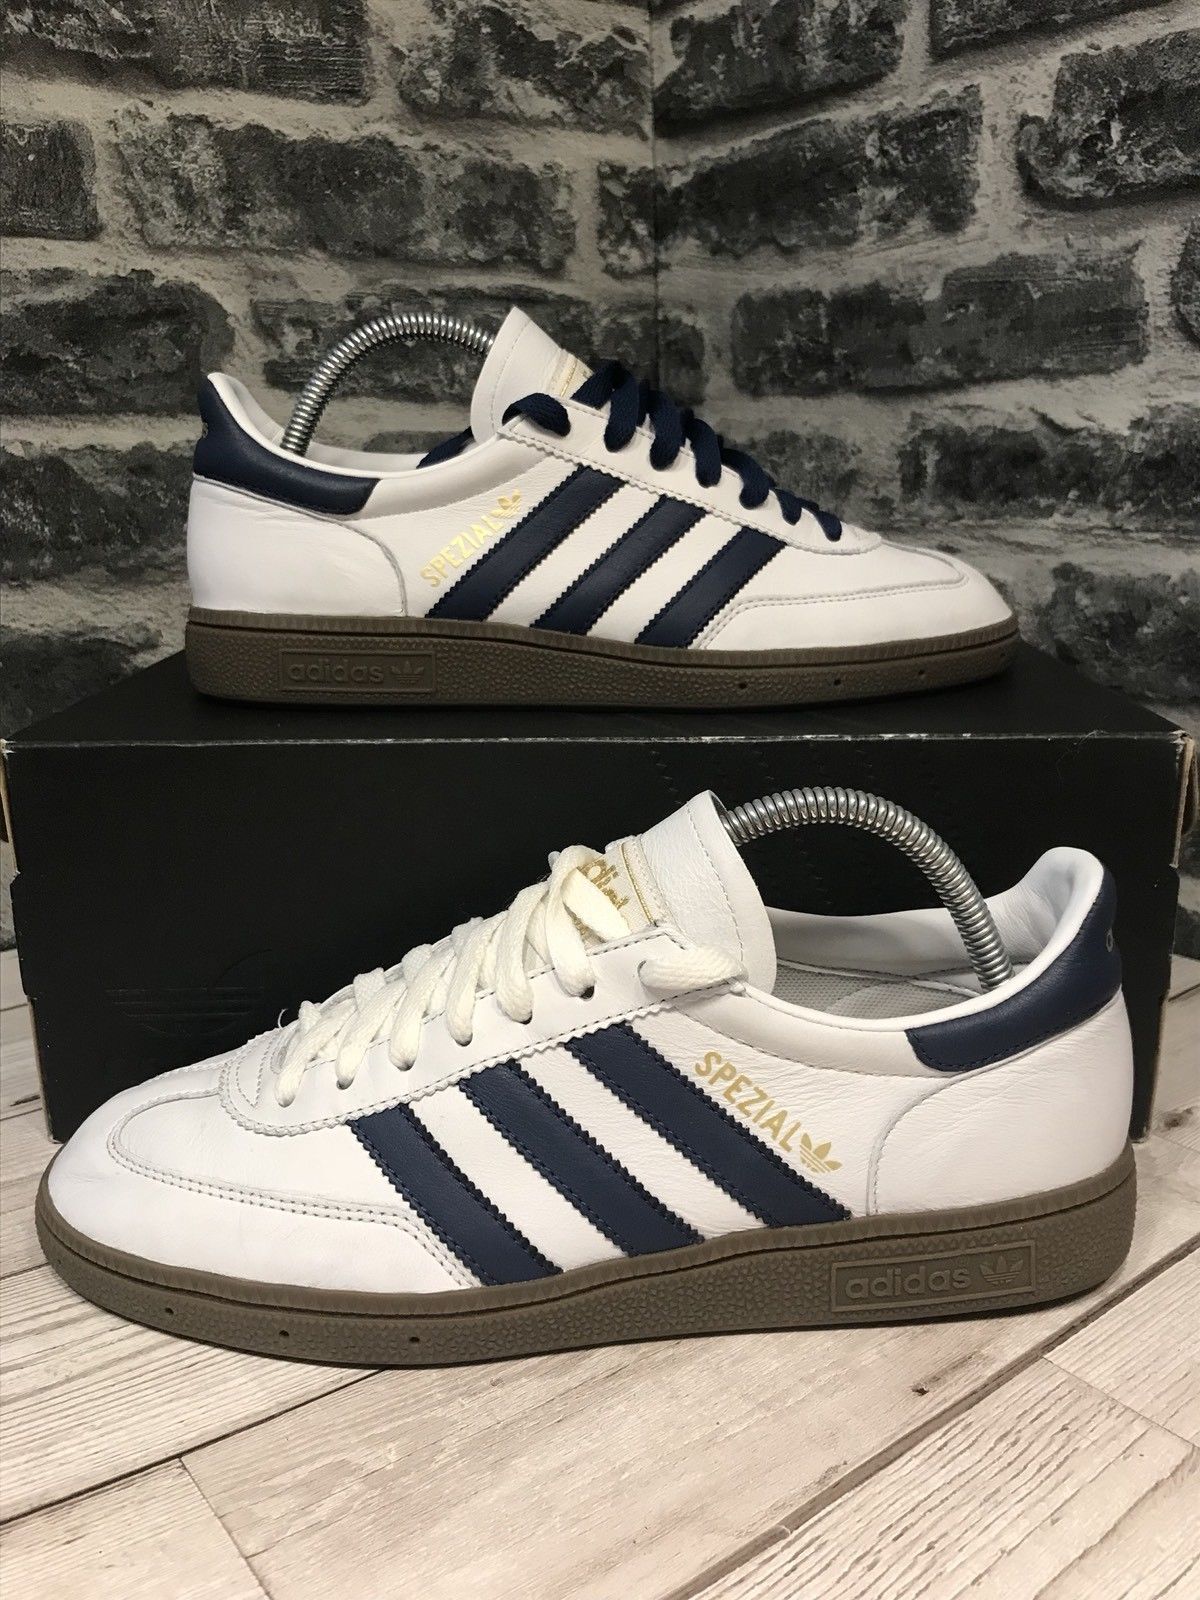 Retro Soles on Twitter: "FOR SALE:- #adidas #spezial #mi white / blue leather NG cw UK Size 7 Two sets of laces blue &amp; 10/10 Condition with adidas and og